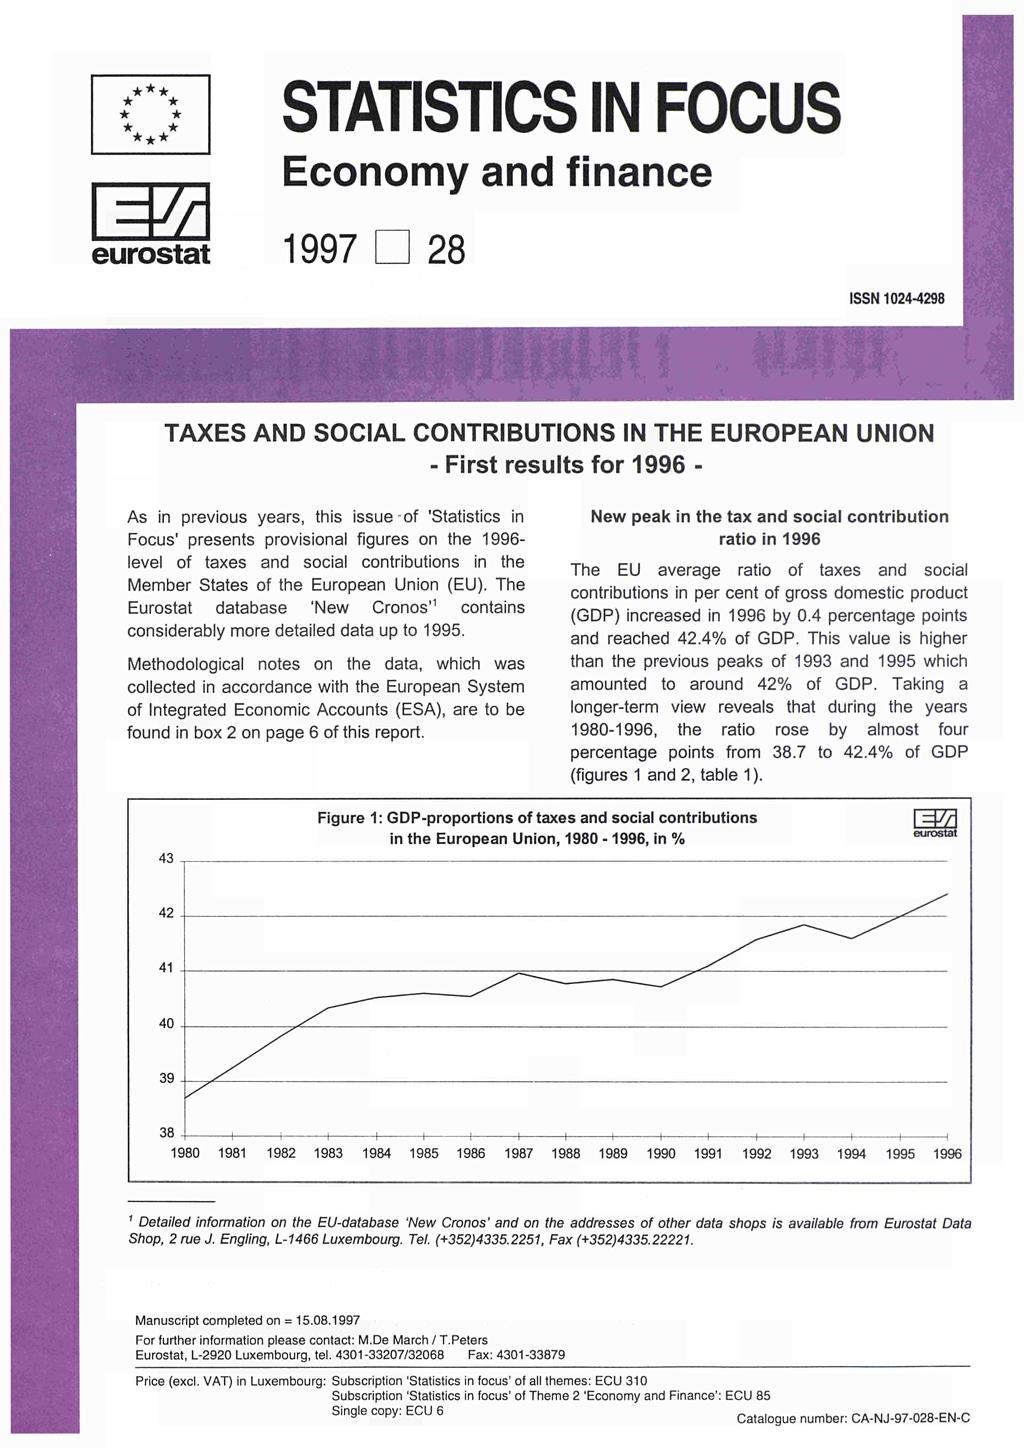 STATISTICS IN FOCUS Economy and finance 1997 U 28 ISSN 1024-4298 TAXES AND SOCIAL CONTRIBUTIONS IN THE EUROPEAN UNION -First results for - As in previous years, this issue -of 'Statistics in Focus'